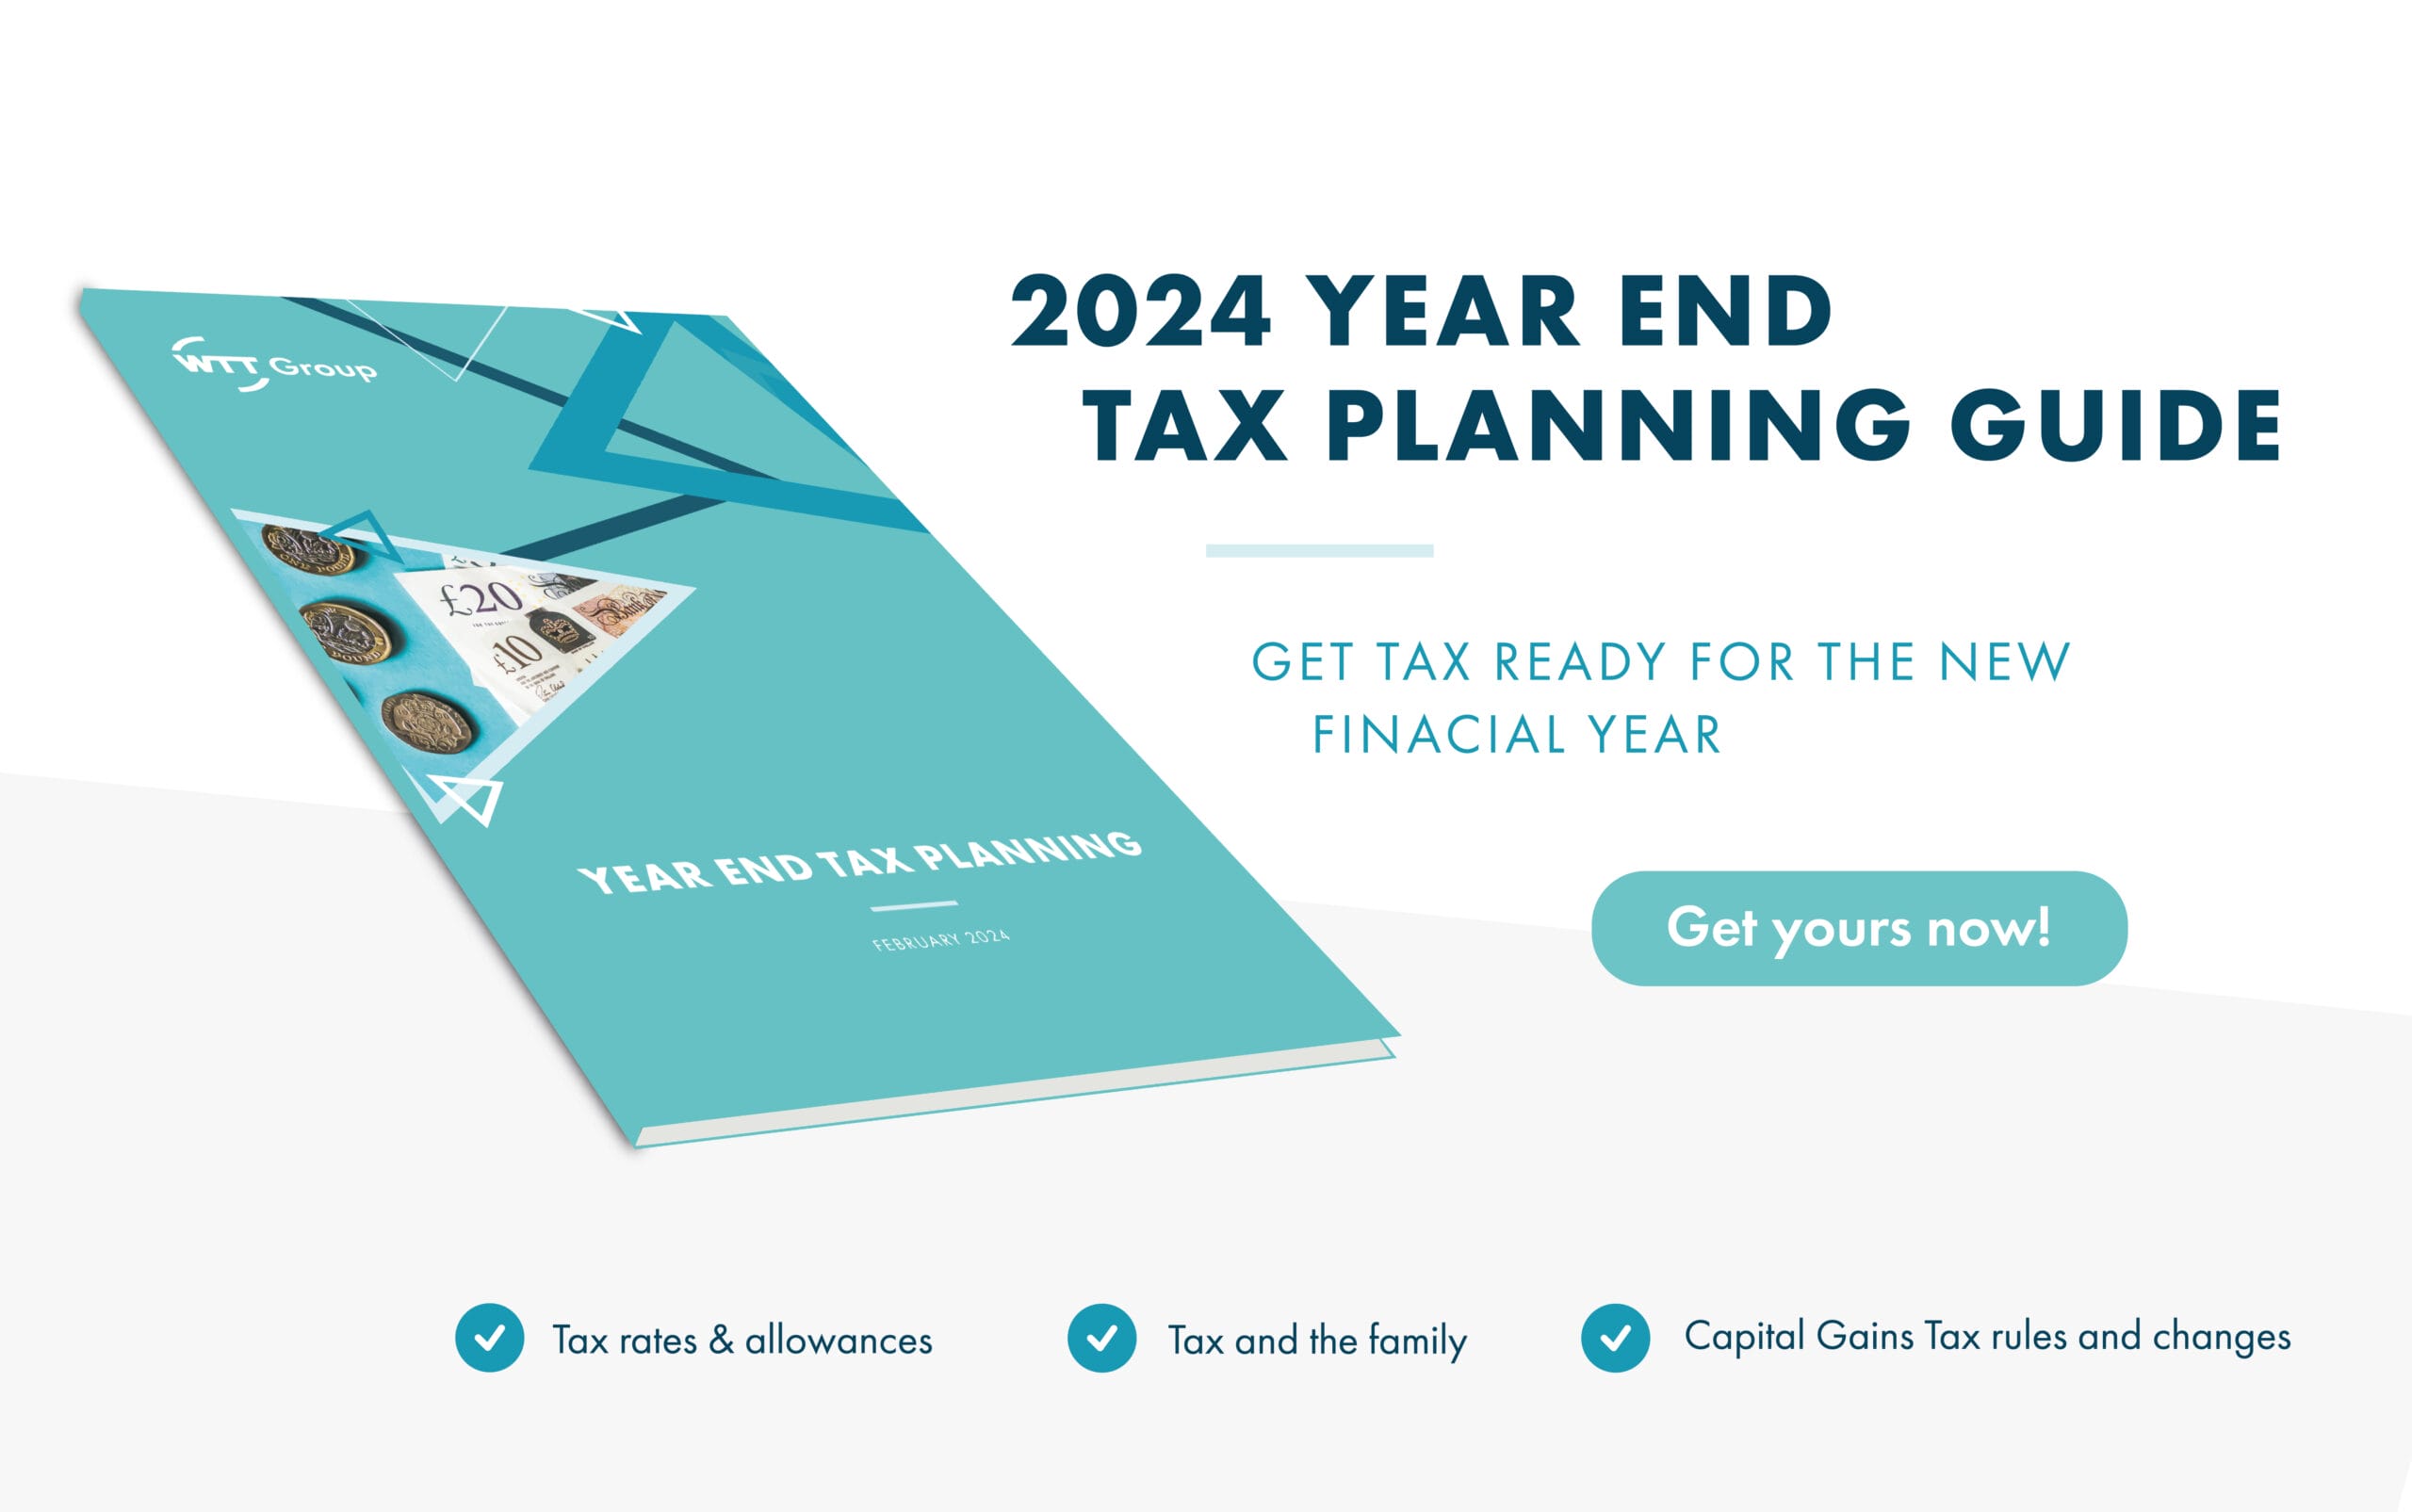 2024 Year End Tax Planning Guide